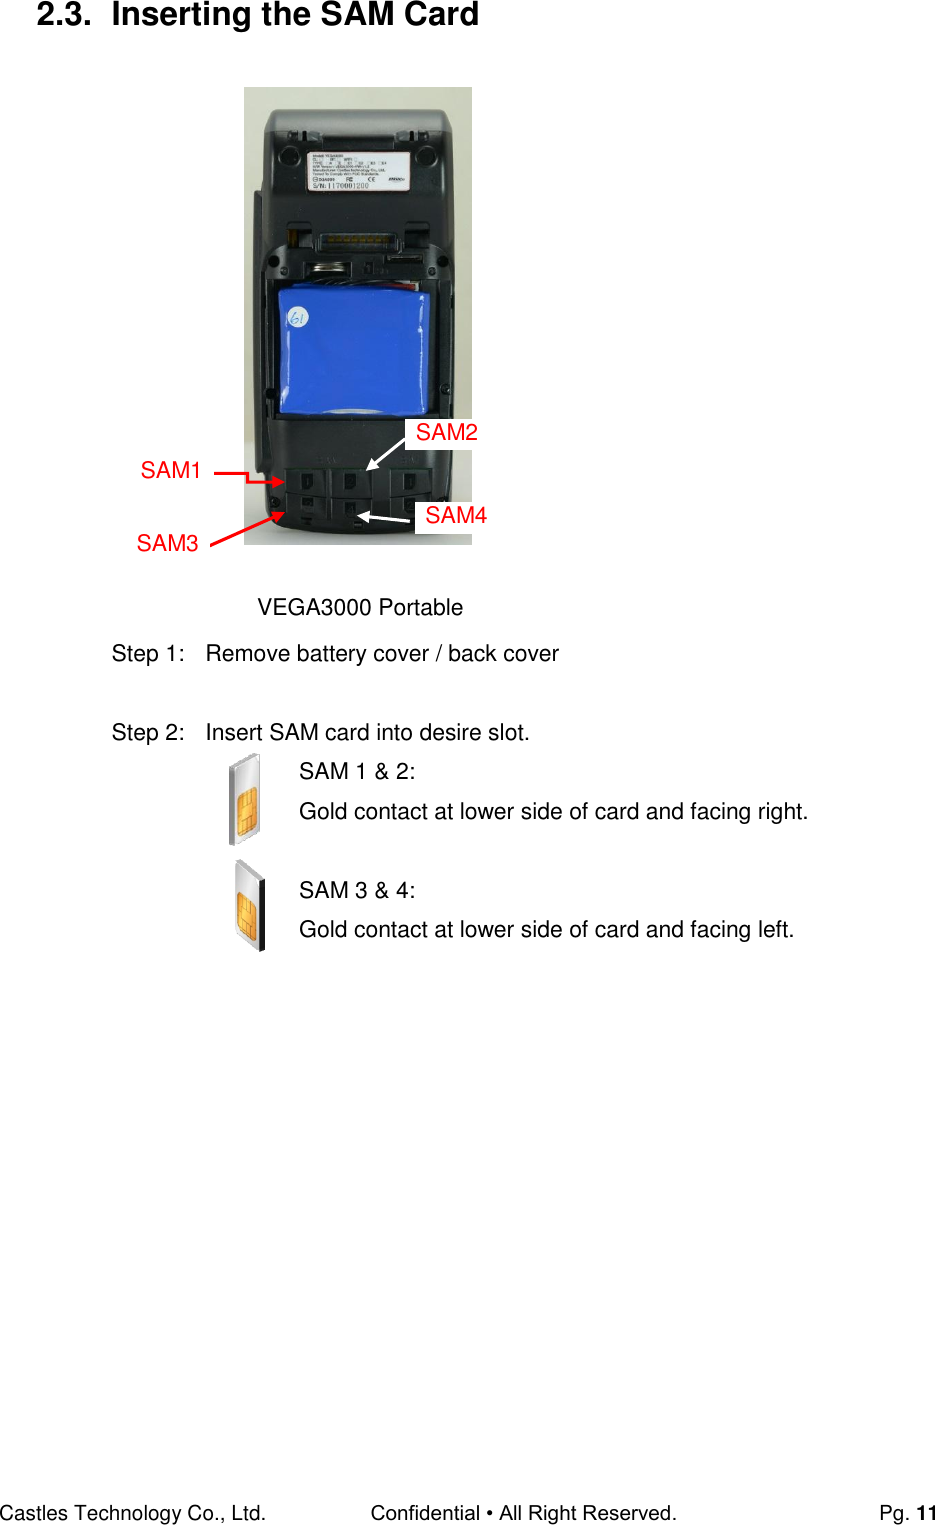 Castles Technology Co., Ltd. Confidential • All Right Reserved.  Pg. 11 2.3.  Inserting the SAM Card                    Step 1:  Remove battery cover / back cover  Step 2:  Insert SAM card into desire slot. SAM 1 &amp; 2: Gold contact at lower side of card and facing right.  SAM 3 &amp; 4:  Gold contact at lower side of card and facing left.     VEGA3000 Portable SAM1 SAM2 SAM3 SAM4 